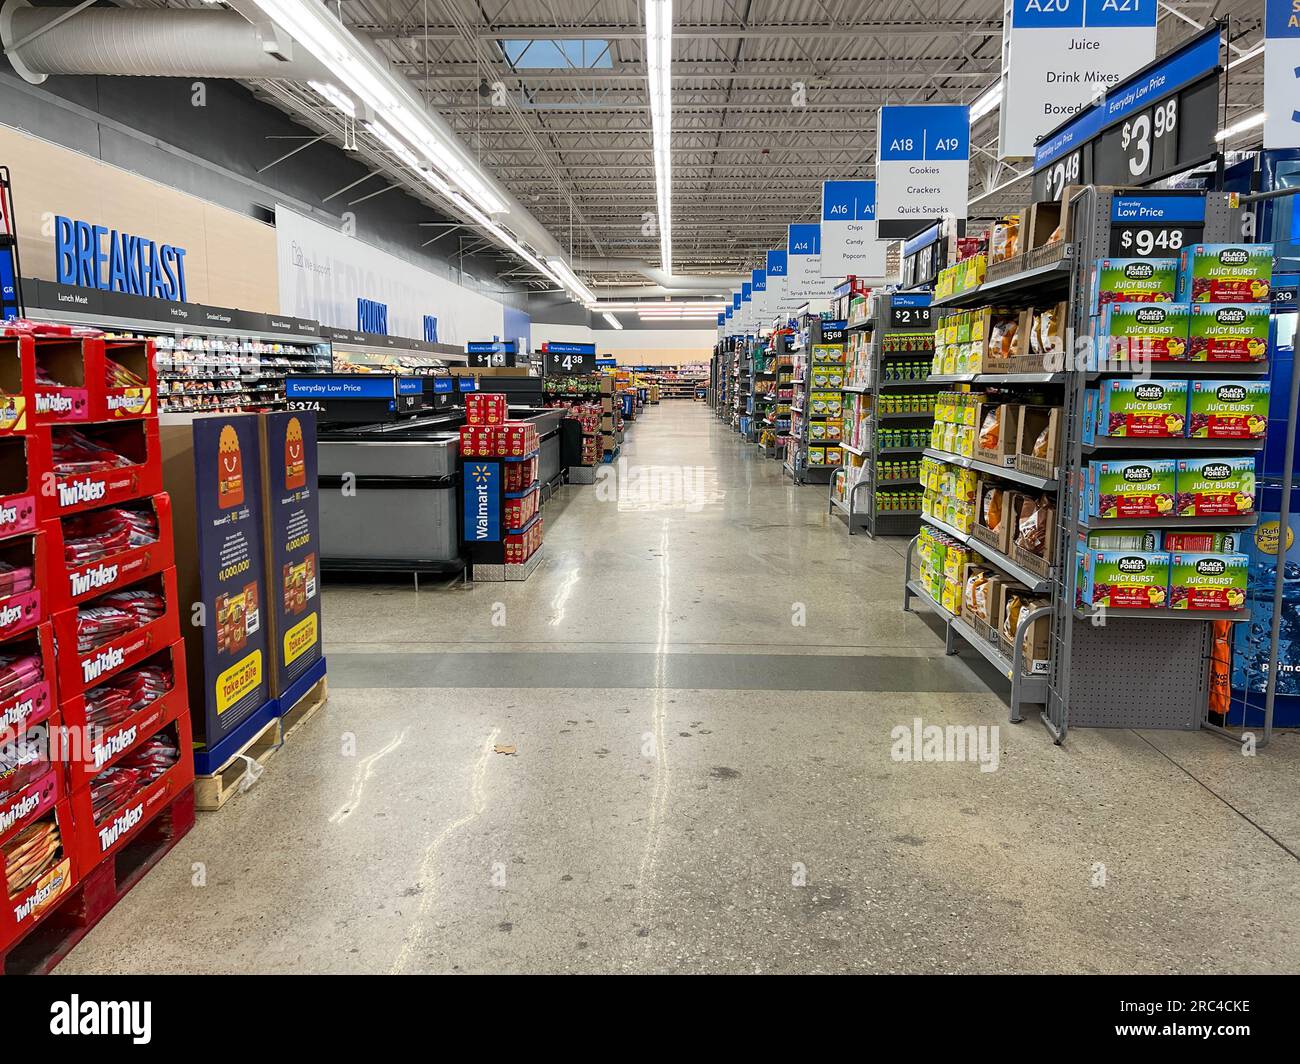 https://c8.alamy.com/comp/2RC4CKE/norfolk-ne-usa-may-12-2023-a-grocery-store-aisle-at-a-walmart-store-with-no-people-2RC4CKE.jpg